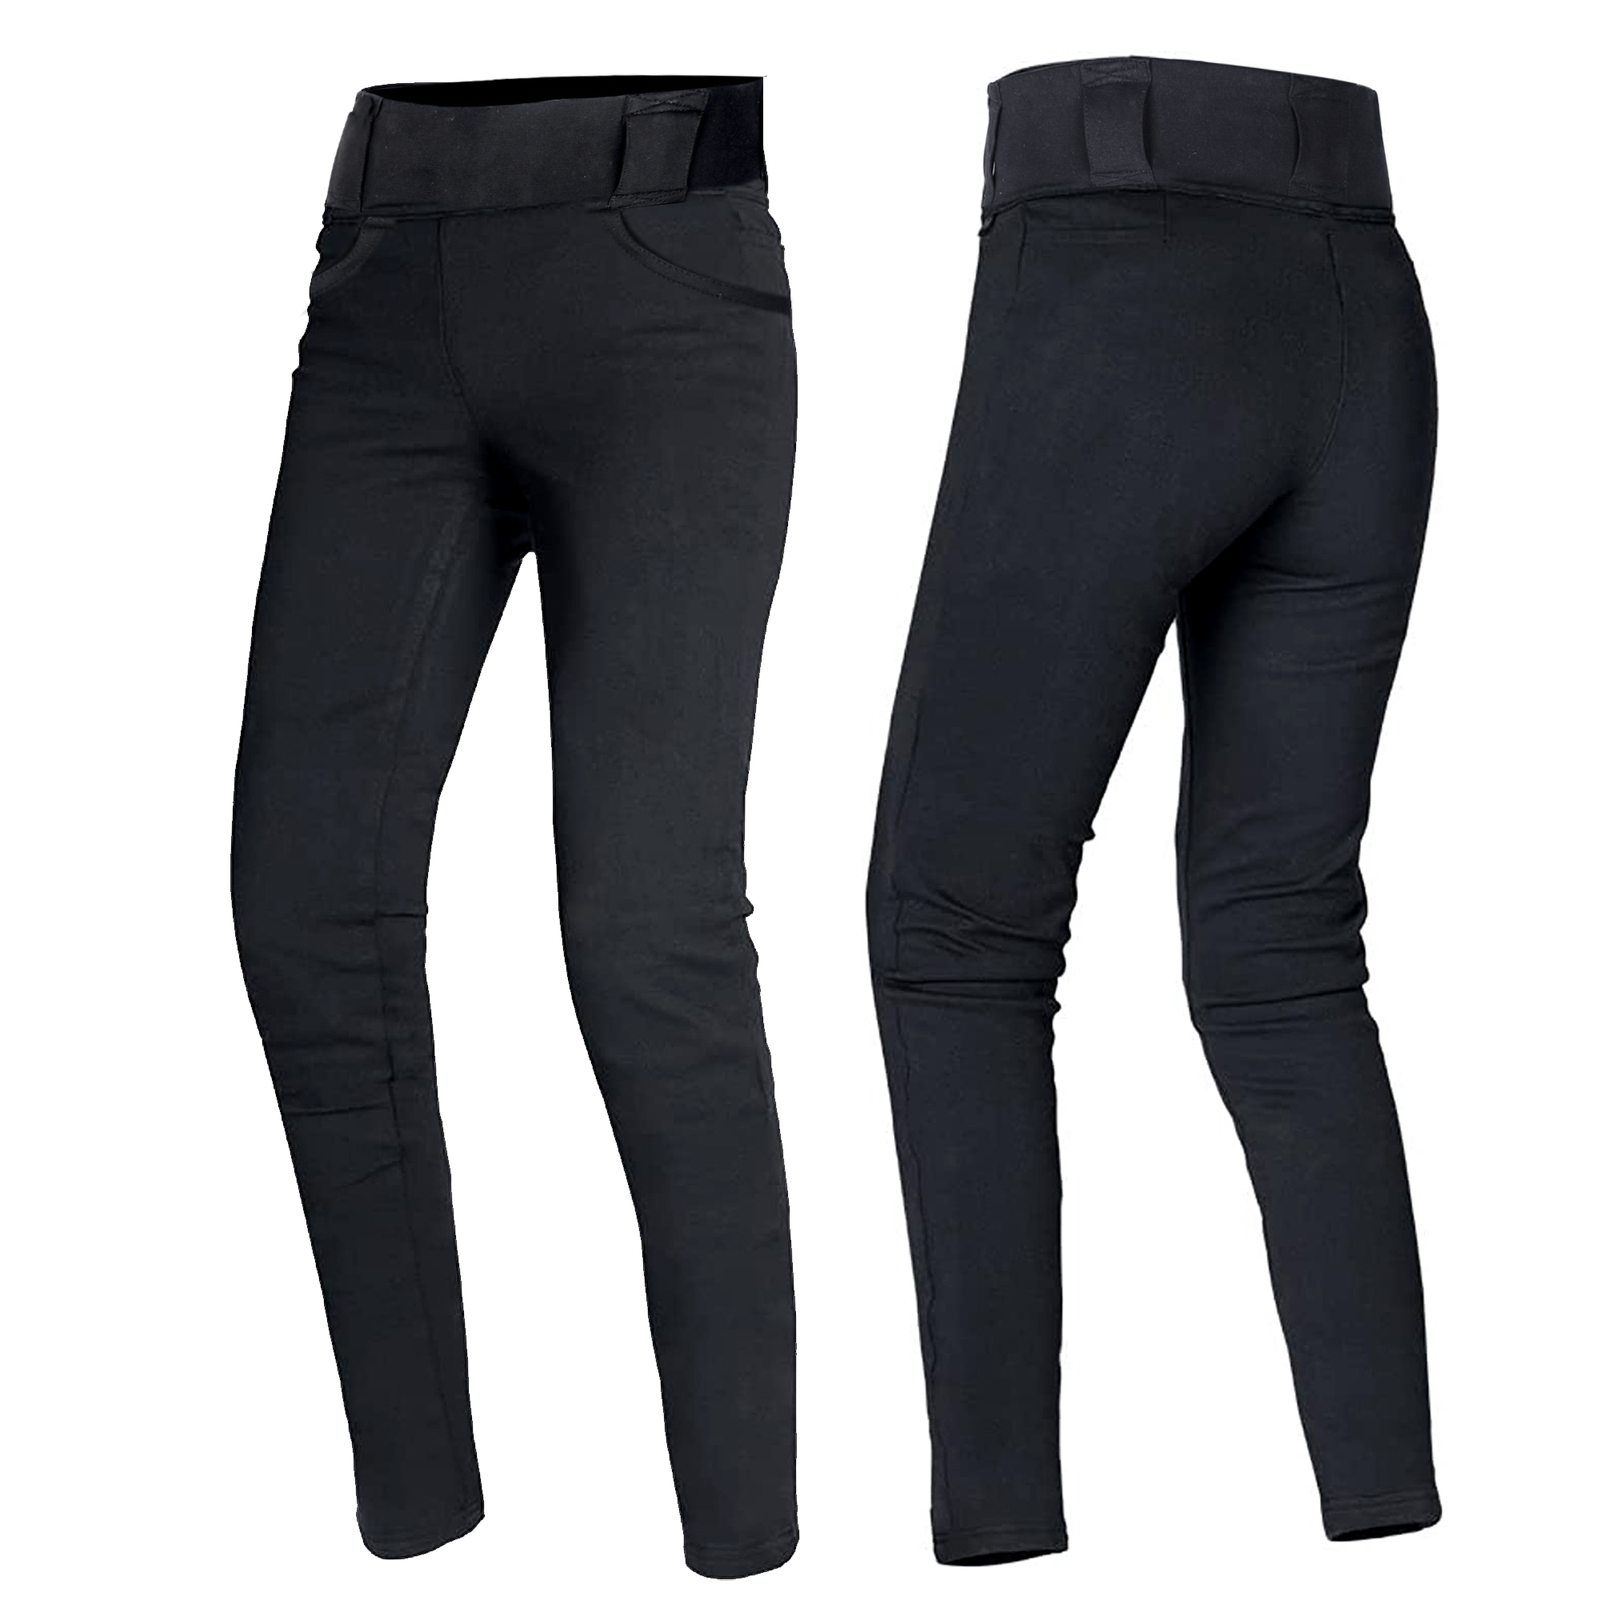 Leggings- High Waisted Shaping Pants - Comfort of Palestine